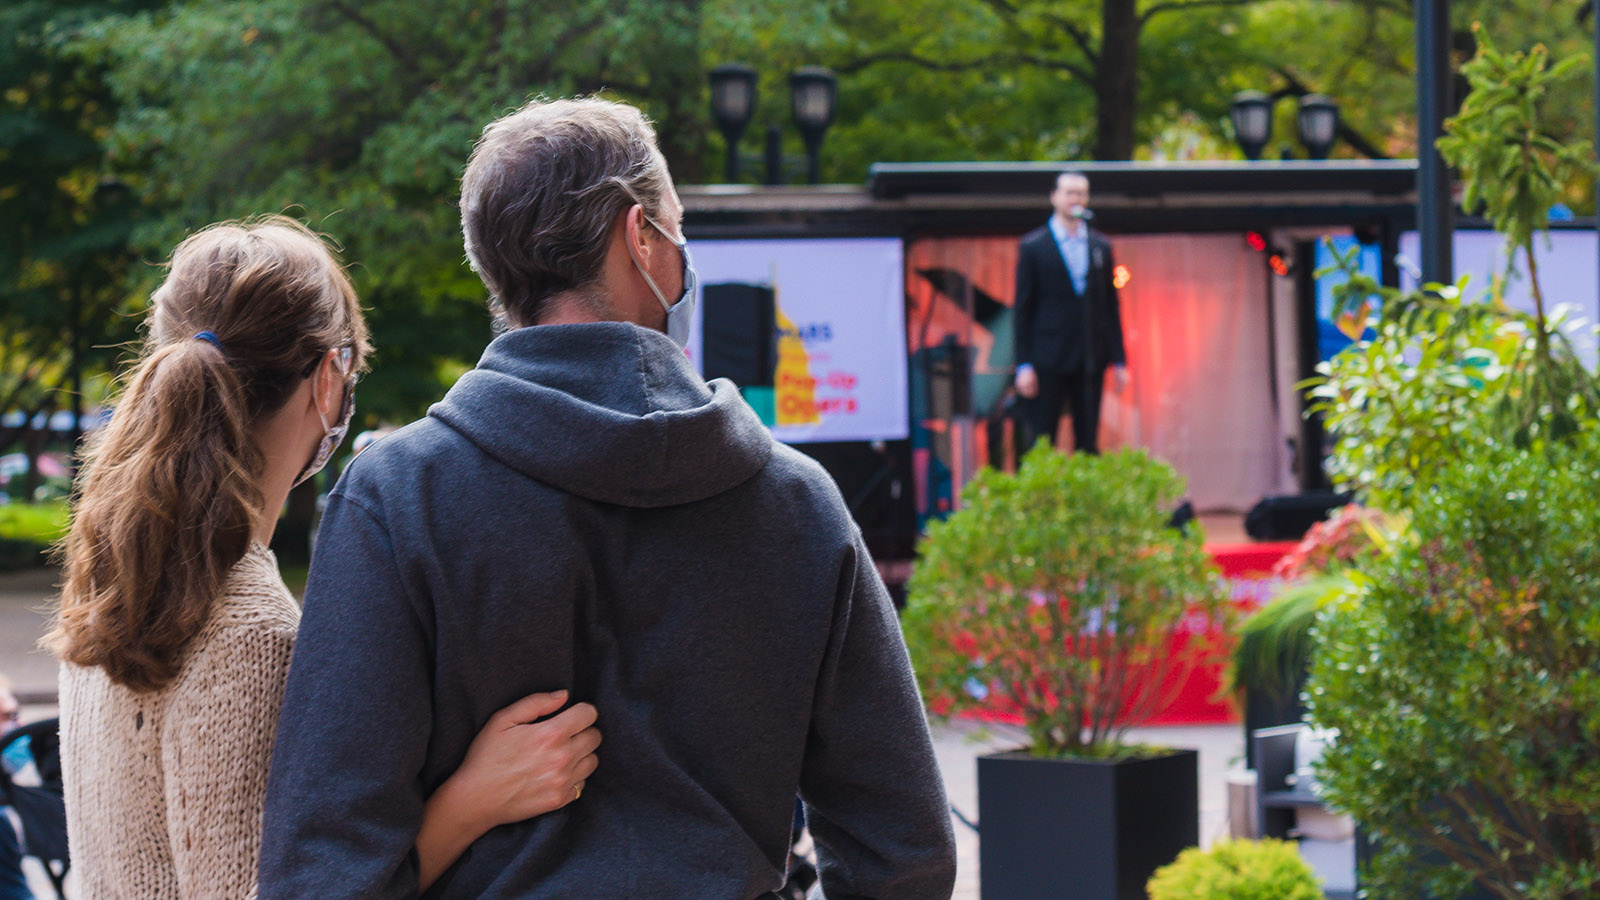 A woman and man watch a male singer perform from an outdoor stage on a truck in the daytime.